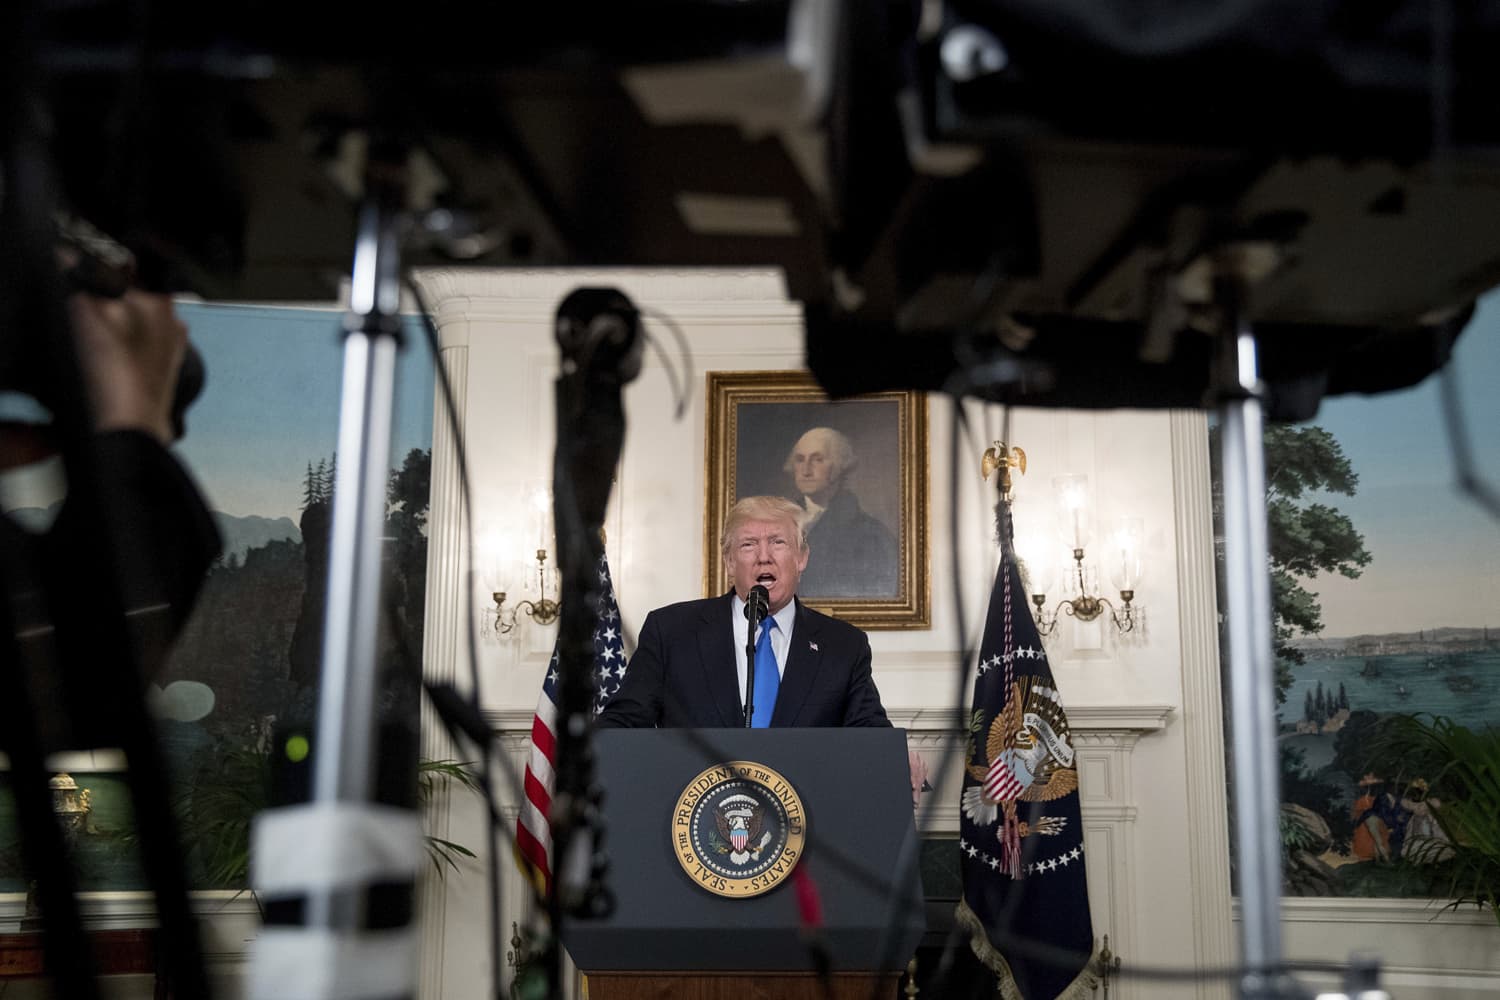 President Donald Trump speaks in the Diplomatic Room of the White House in Washington, Wednesday, June 14, 2017, about the shooting in Alexandria, Va. where House Majority Whip Steve Scalise of La., and others, where shot during a Congressional baseball practice. (Andrew Harnik/AP)